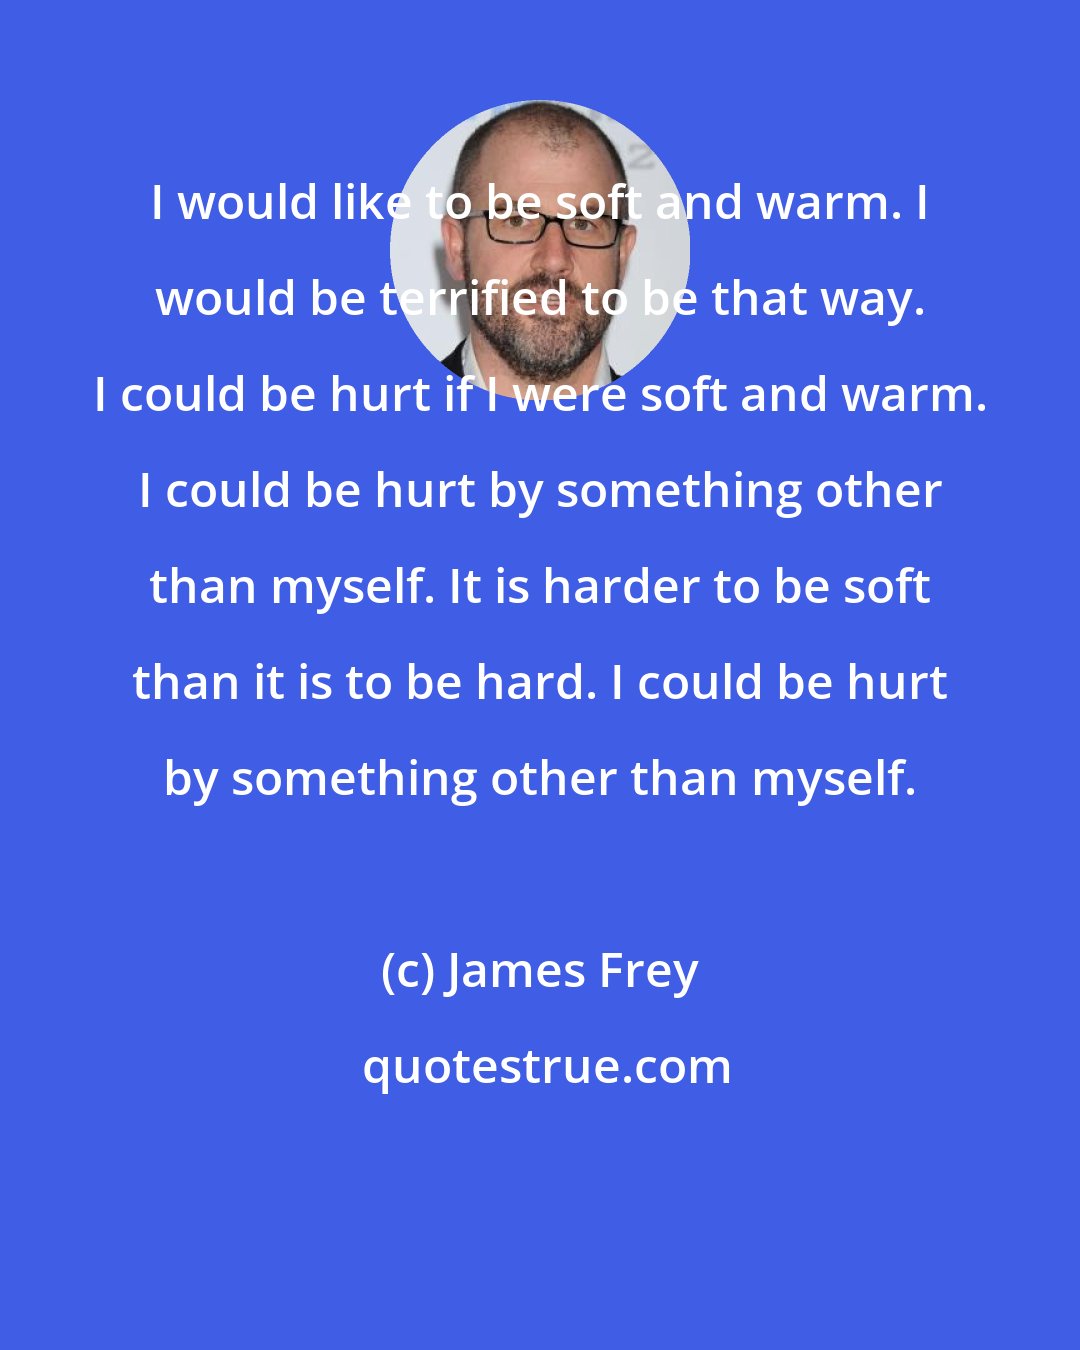 James Frey: I would like to be soft and warm. I would be terrified to be that way. I could be hurt if I were soft and warm. I could be hurt by something other than myself. It is harder to be soft than it is to be hard. I could be hurt by something other than myself.